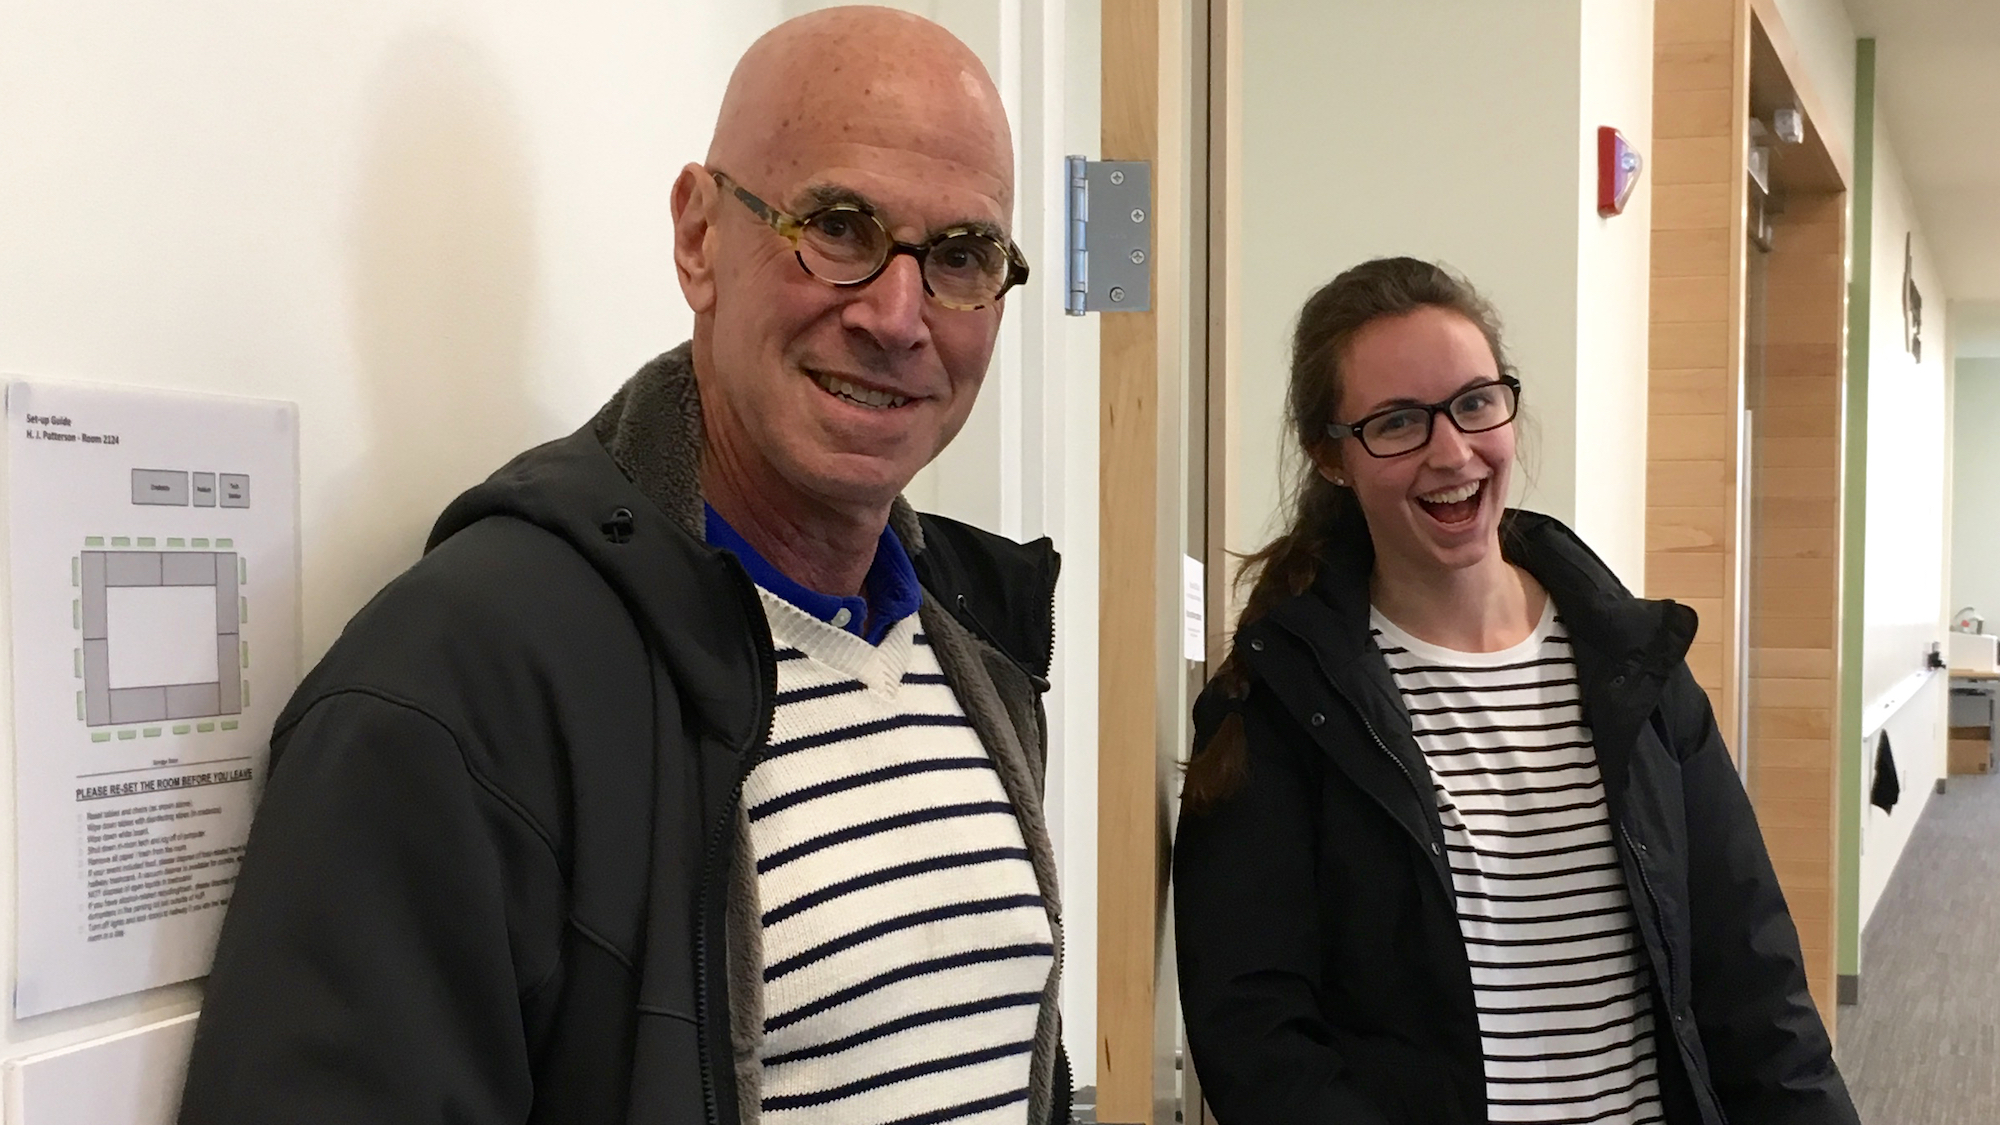 Professor Norbert Hornstein and PhD Student Hanna Muller, both wearing French stripes and laughing bemusedly at the camera